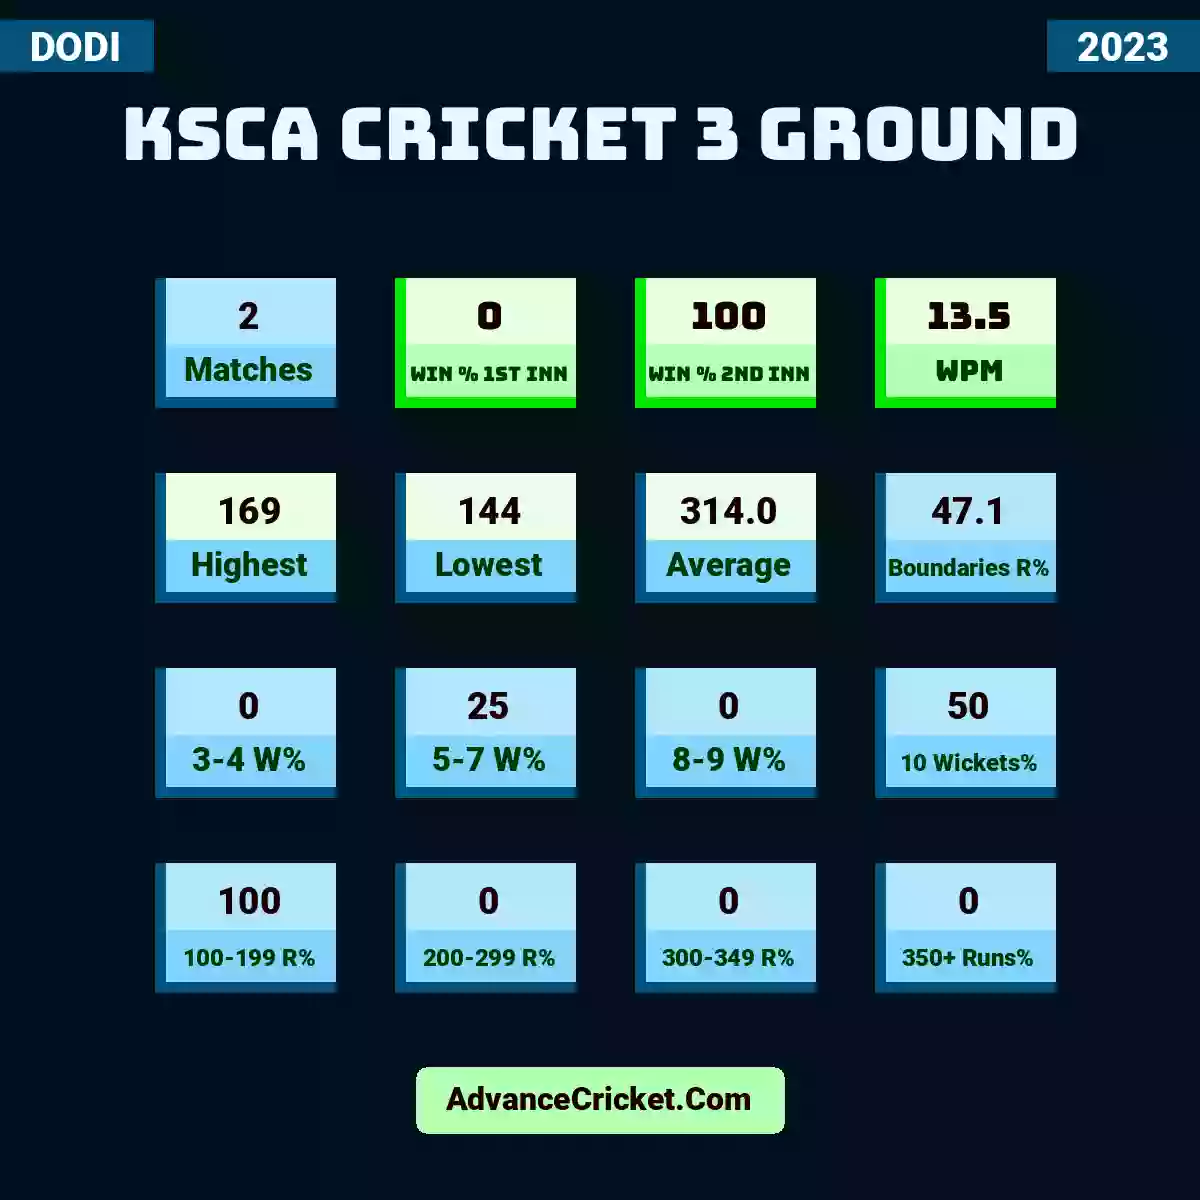 Image showing KSCA Cricket 3 Ground with Matches: 2, Win % 1st Inn: 0, Win % 2nd Inn: 100, WPM: 13.5, Highest: 169, Lowest: 144, Average: 314.0, Boundaries R%: 47.1, 3-4 W%: 0, 5-7 W%: 25, 8-9 W%: 0, 10 Wickets%: 50, 100-199 R%: 100, 200-299 R%: 0, 300-349 R%: 0, 350+ Runs%: 0.